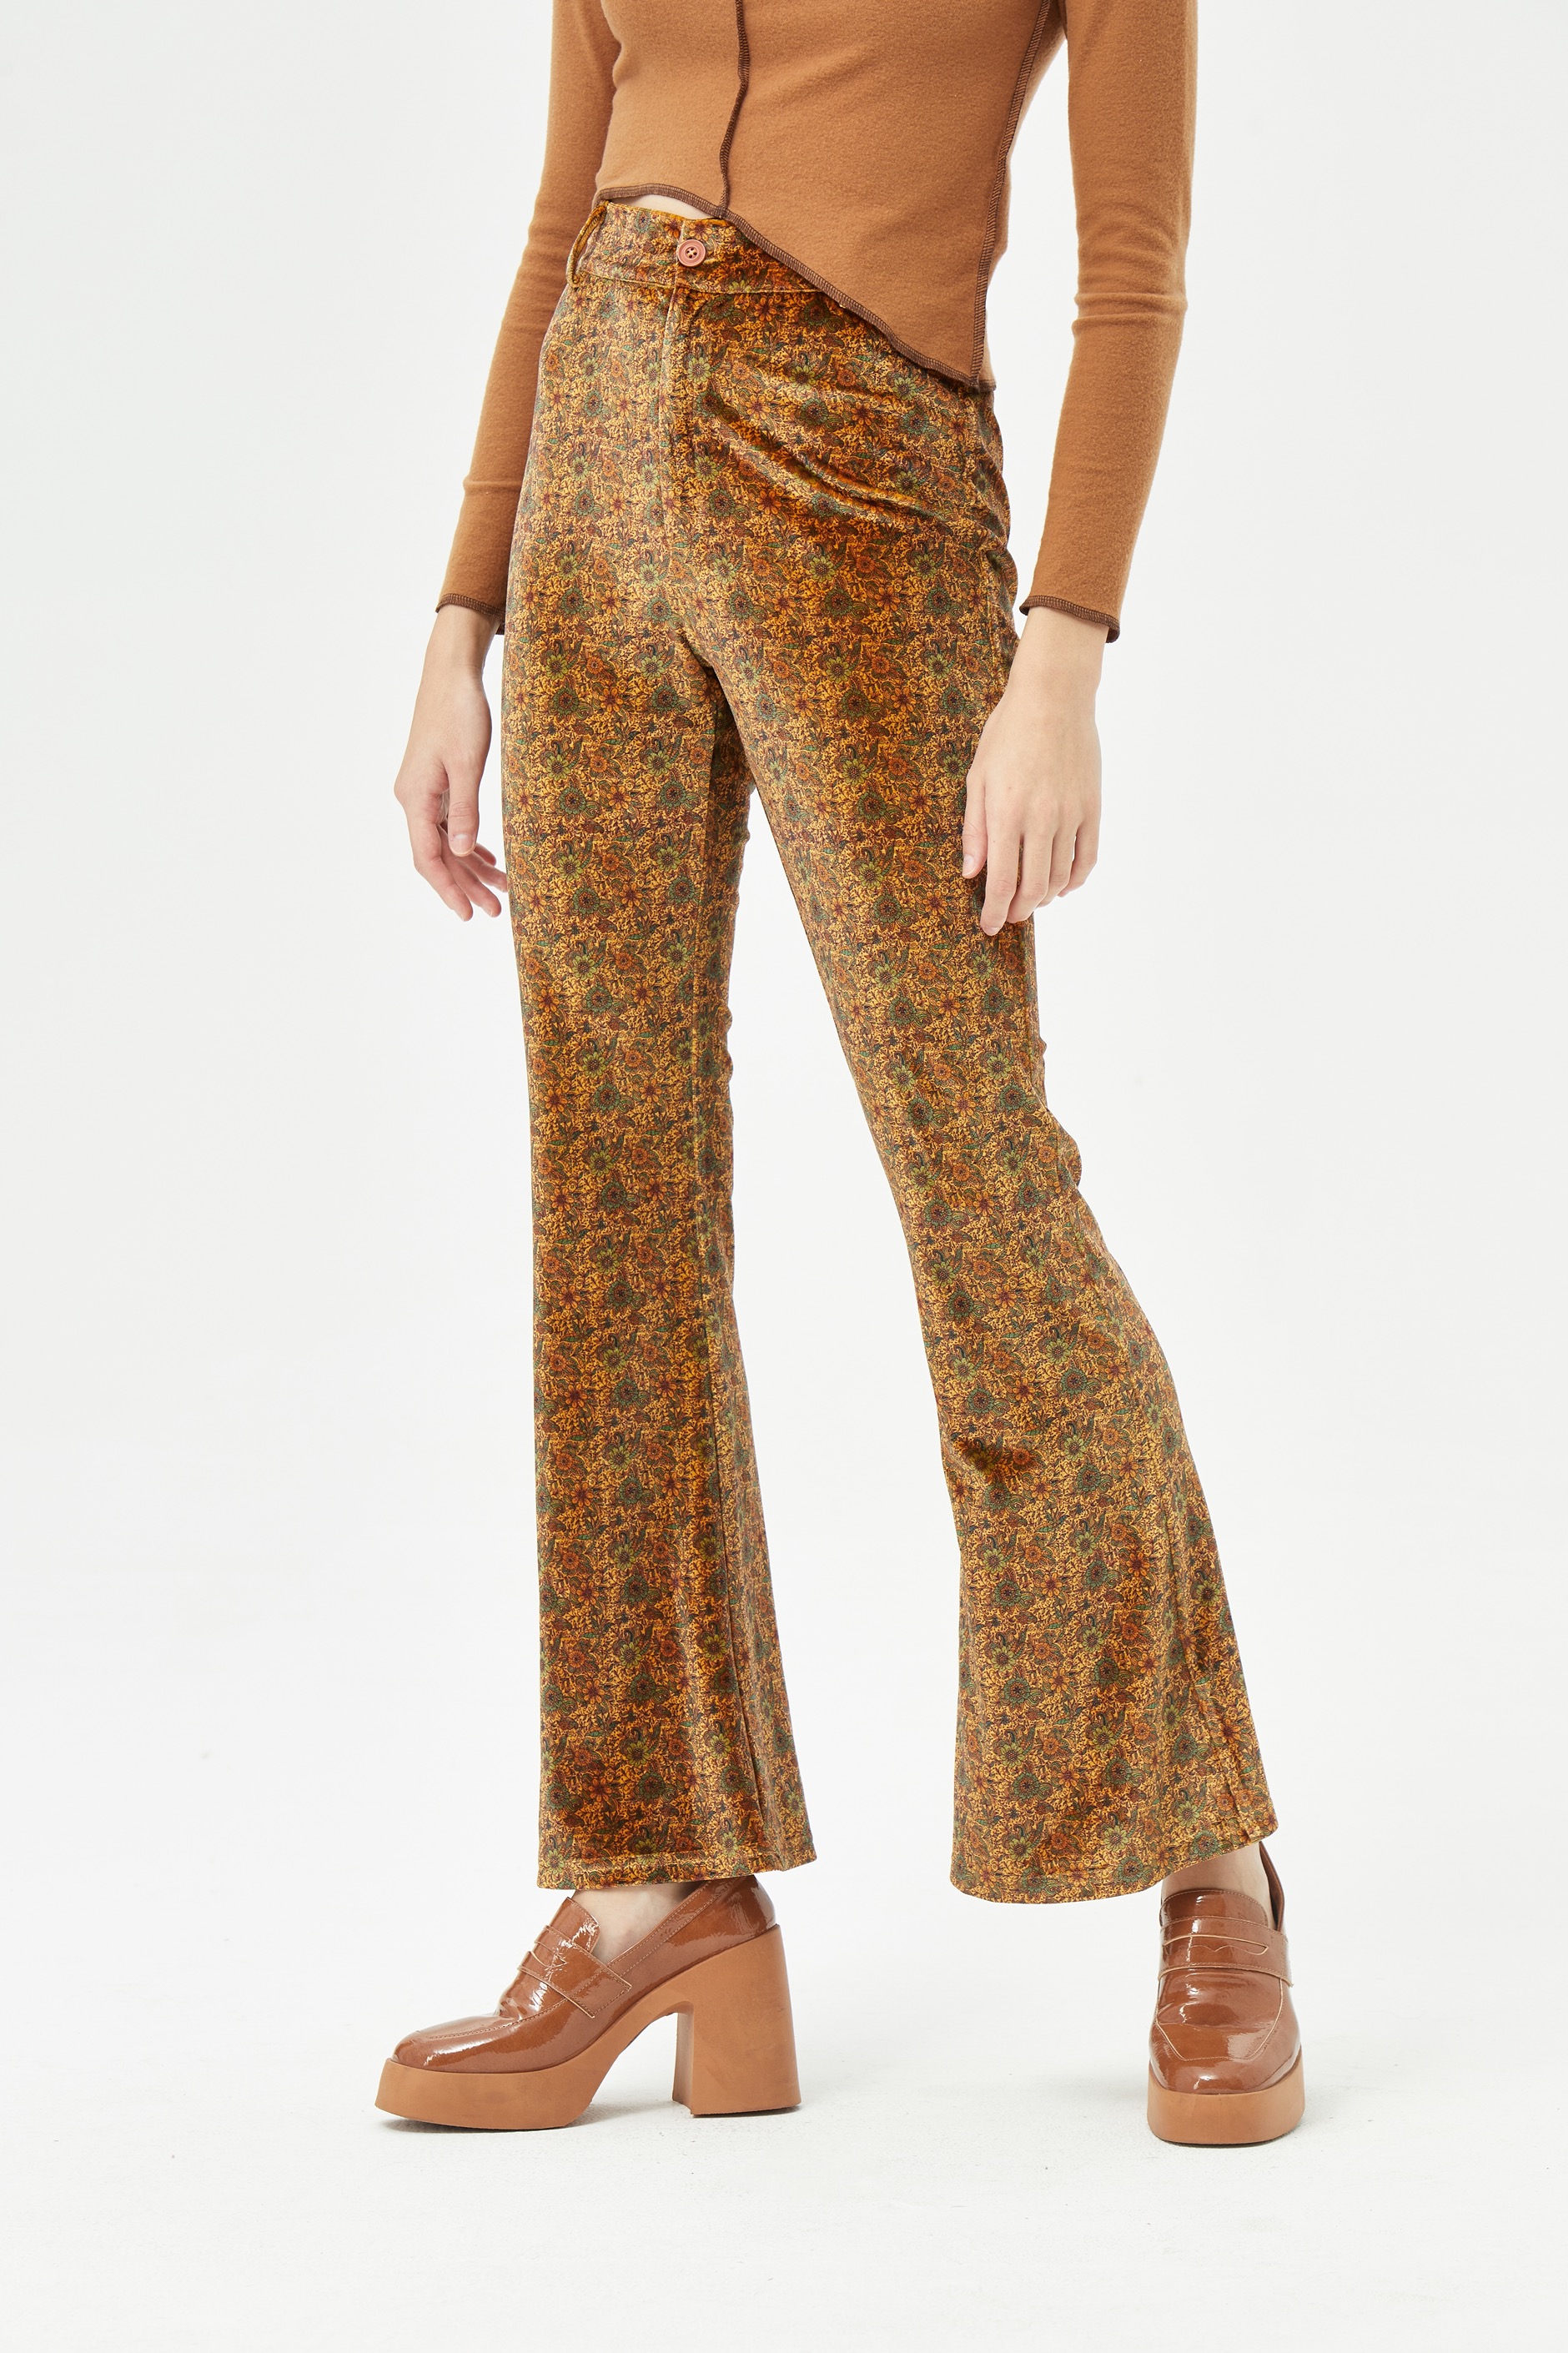 Retro Floral Pattern Trousers - Cider